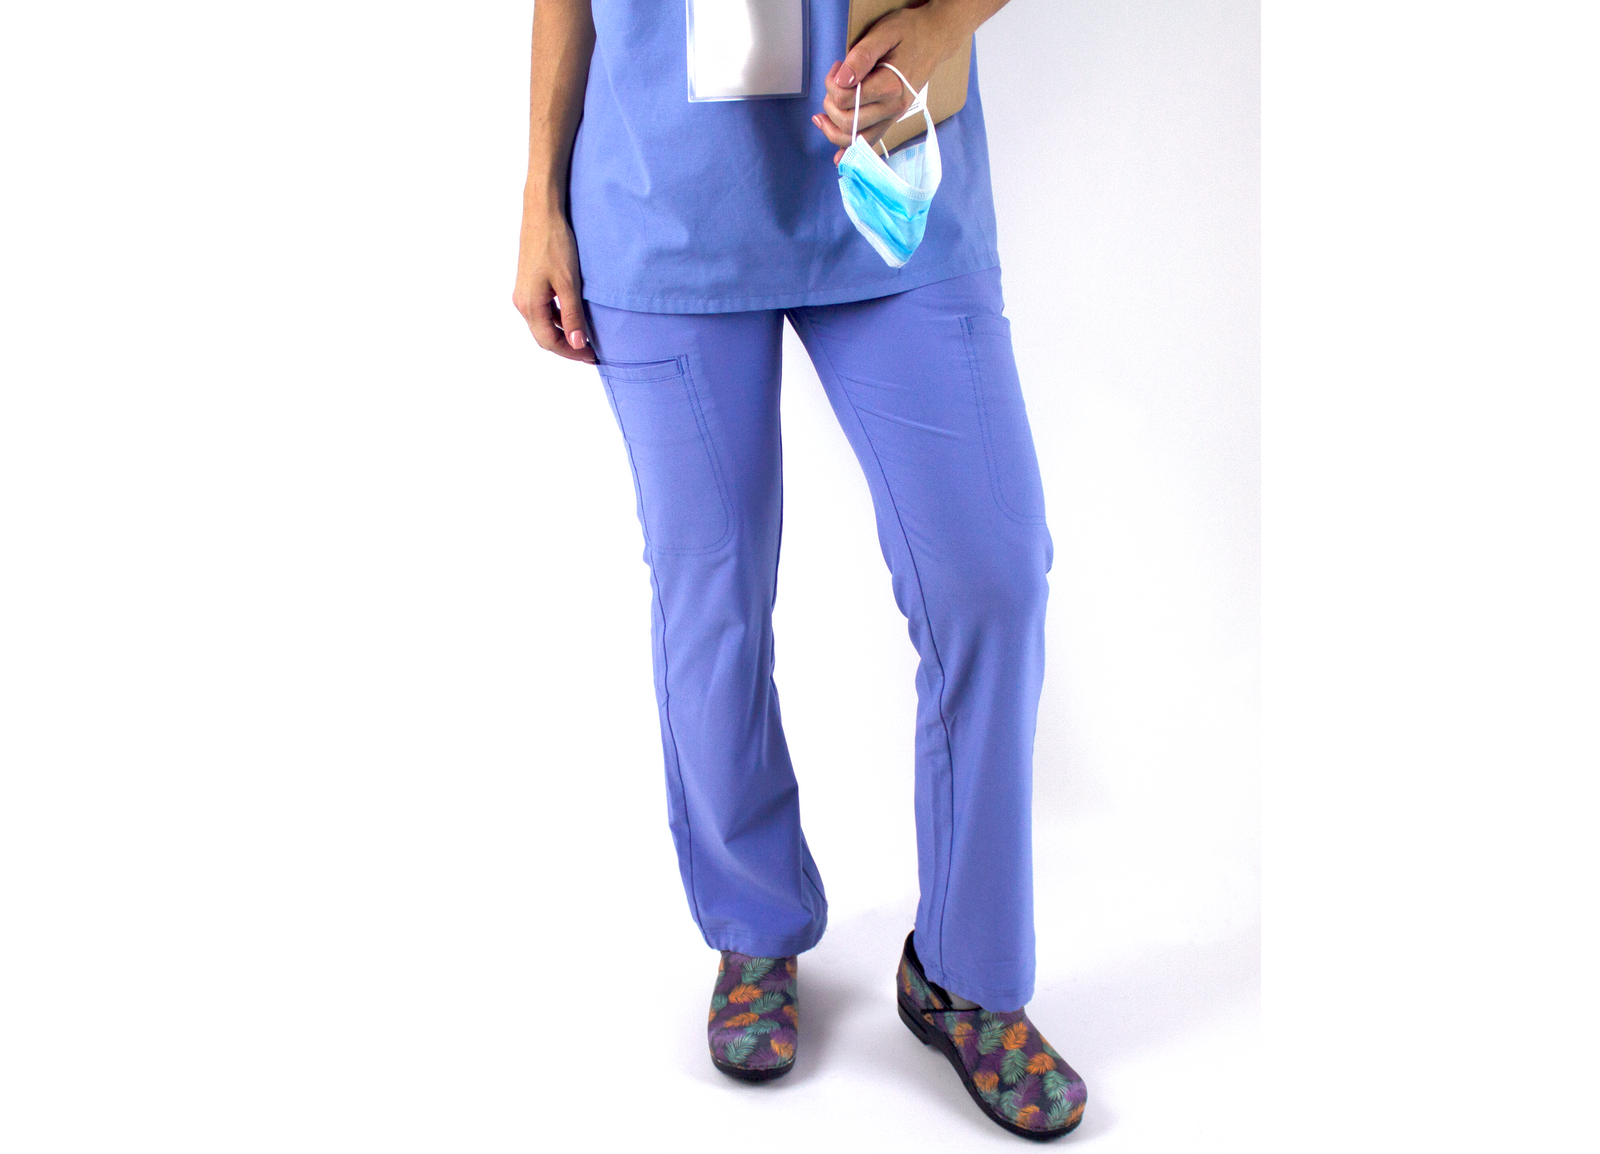 Clogs & Shoes for Veterinary Professionals